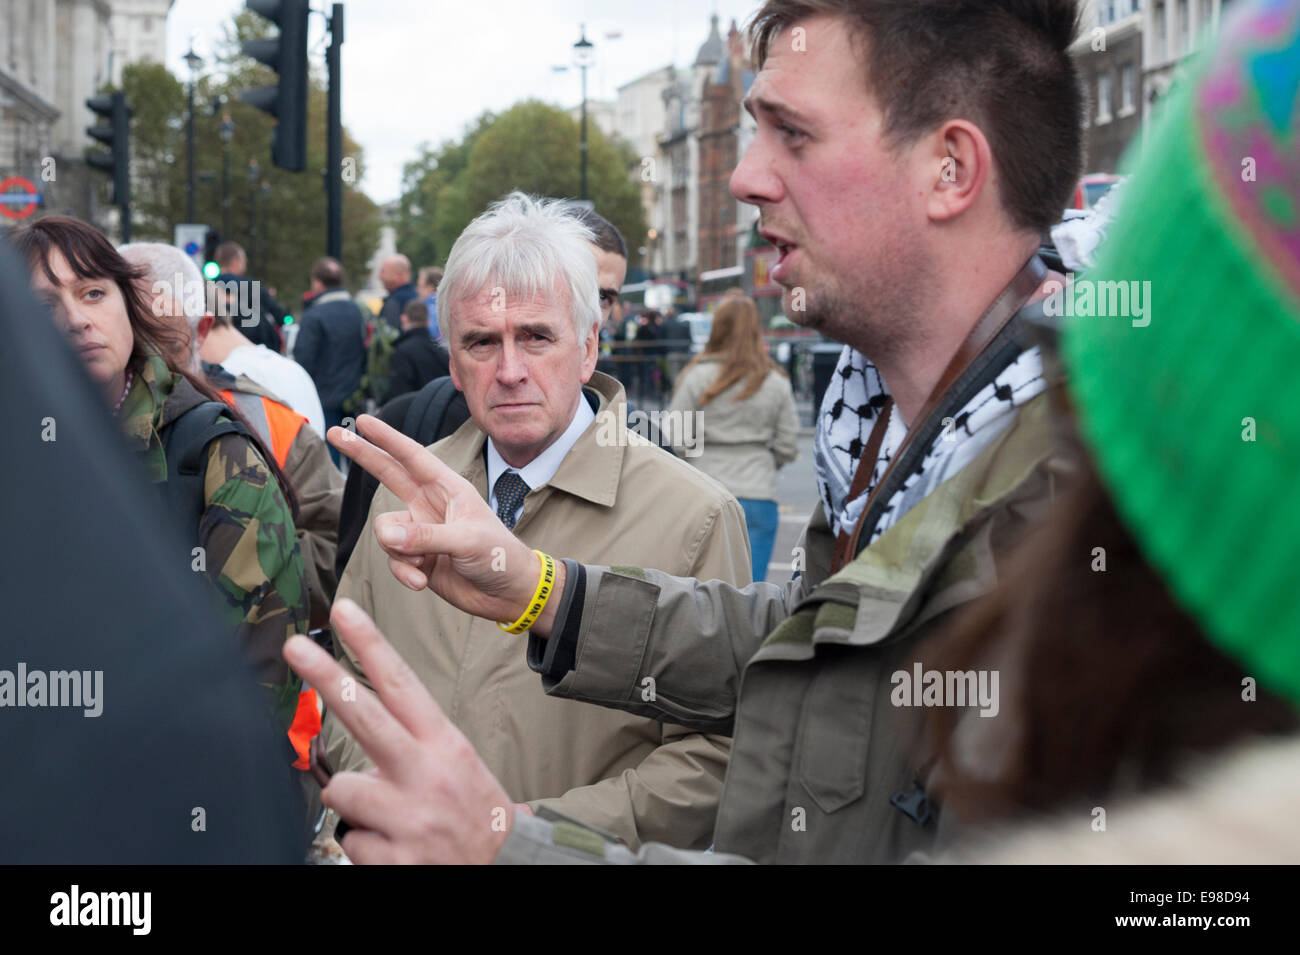 Parliament Square, London, UK. 21st October 2014. Parliament Square green is declared out of bounds by police as they deterred Occupy protesters demonstrating in the public space. Pictured:  John McDonnell MP visits Occupy demonstrators at Parliament Square. Credit:  Lee Thomas/Alamy Live News Stock Photo